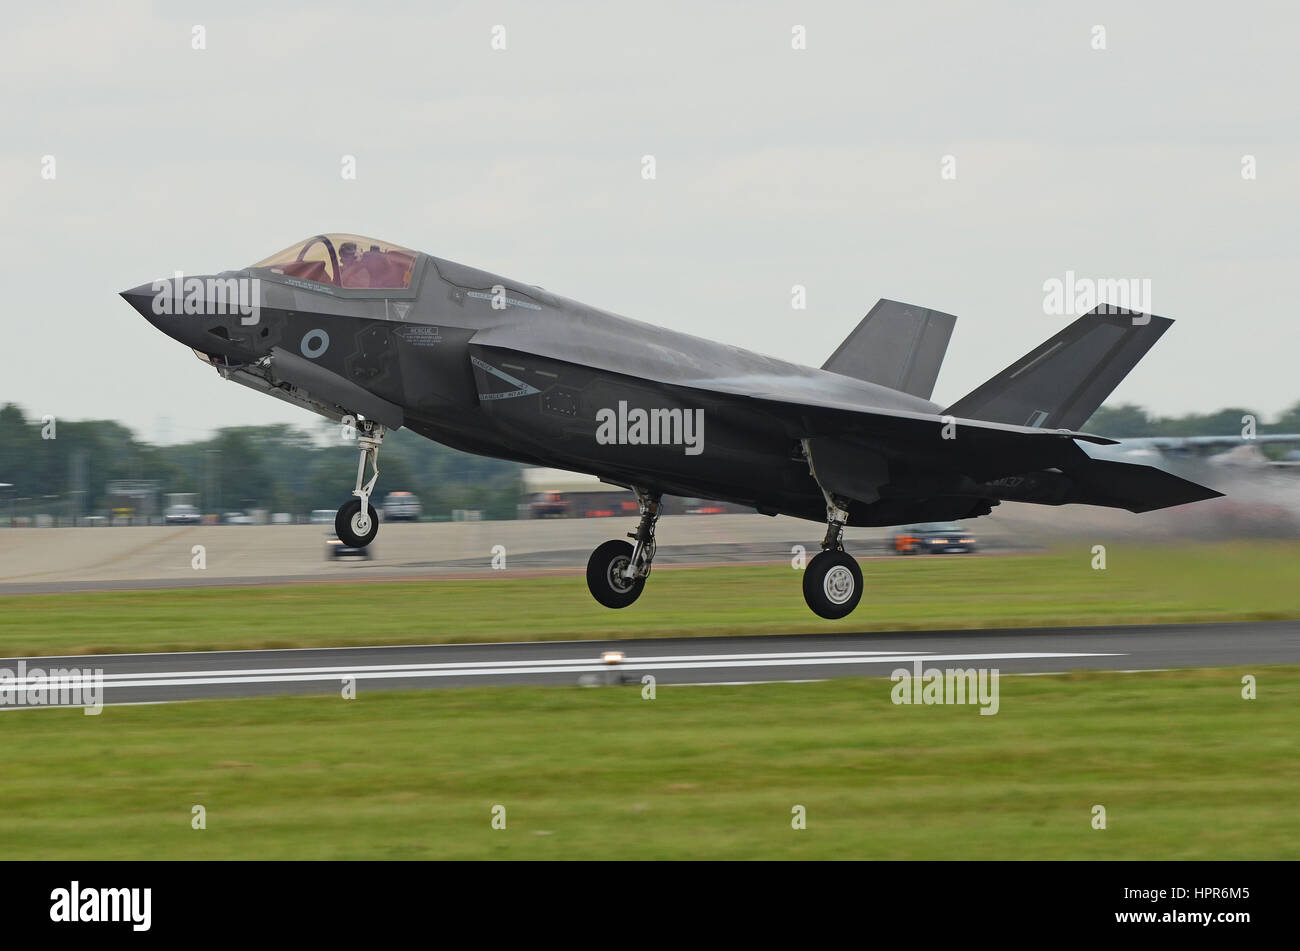 RAF's first Lockheed Martin F-35B Lightning II JSF Joint Strike Fighter. Seen at the Royal International Air Tattoo Fairford, airshow Stock Photo